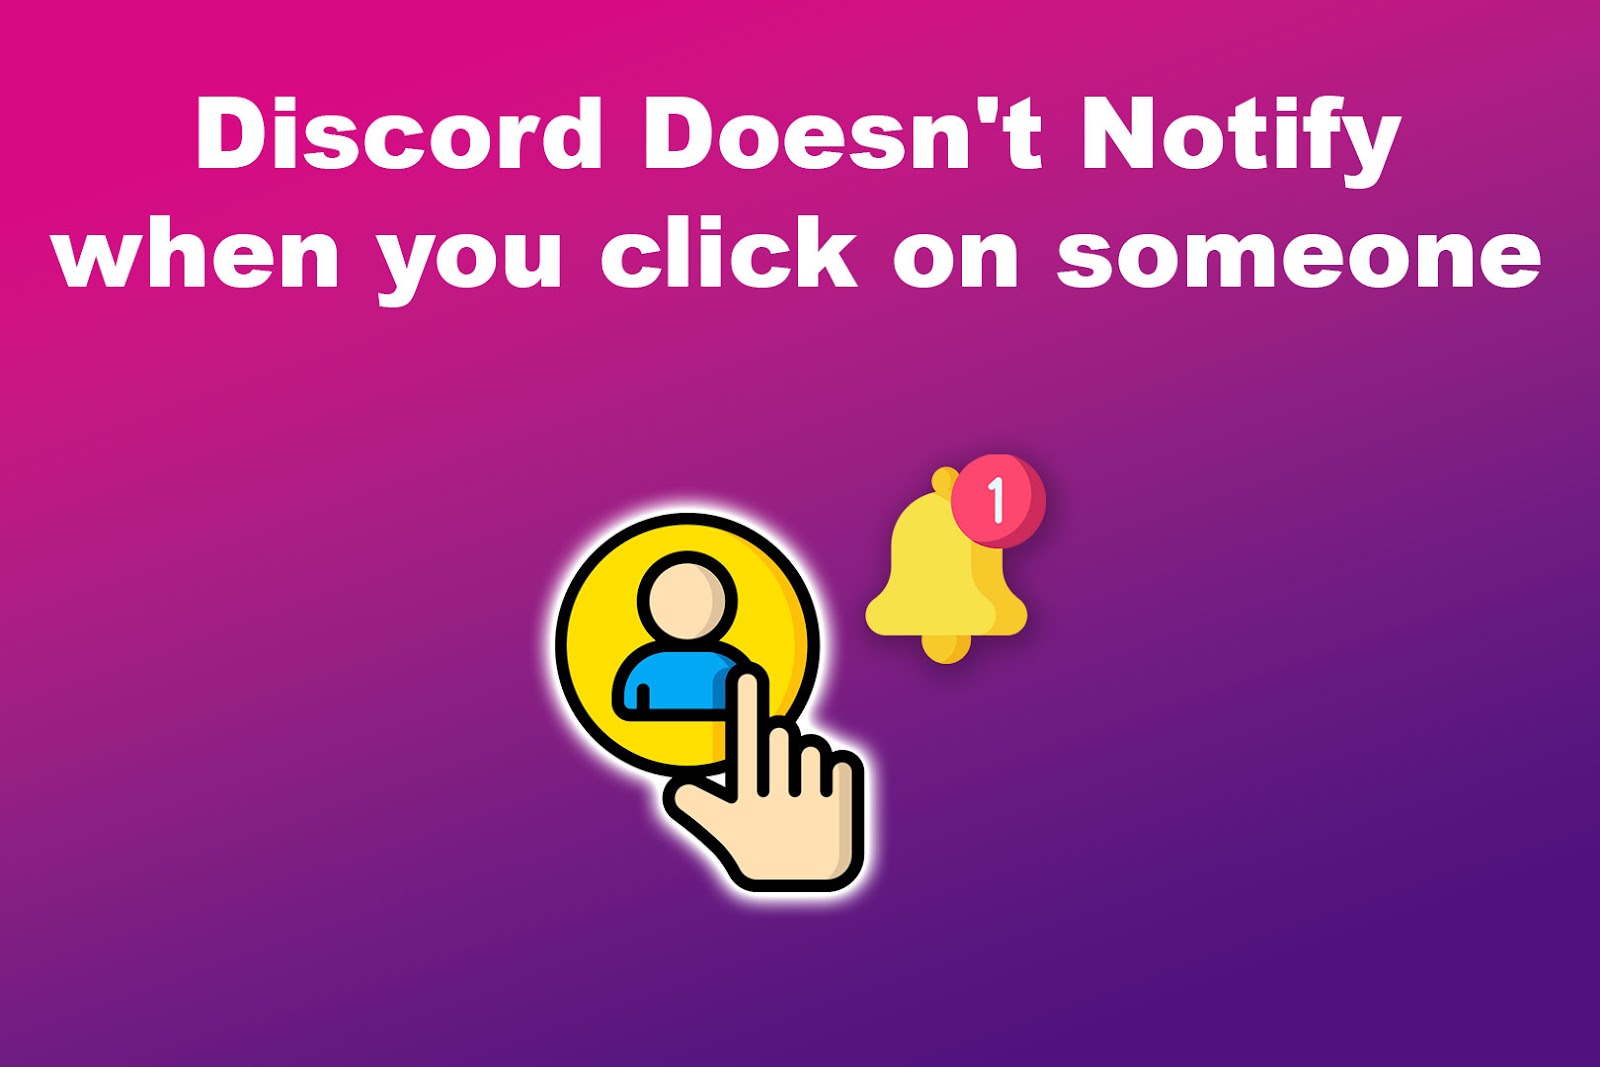 Does Discord Notify When You Click On Someone